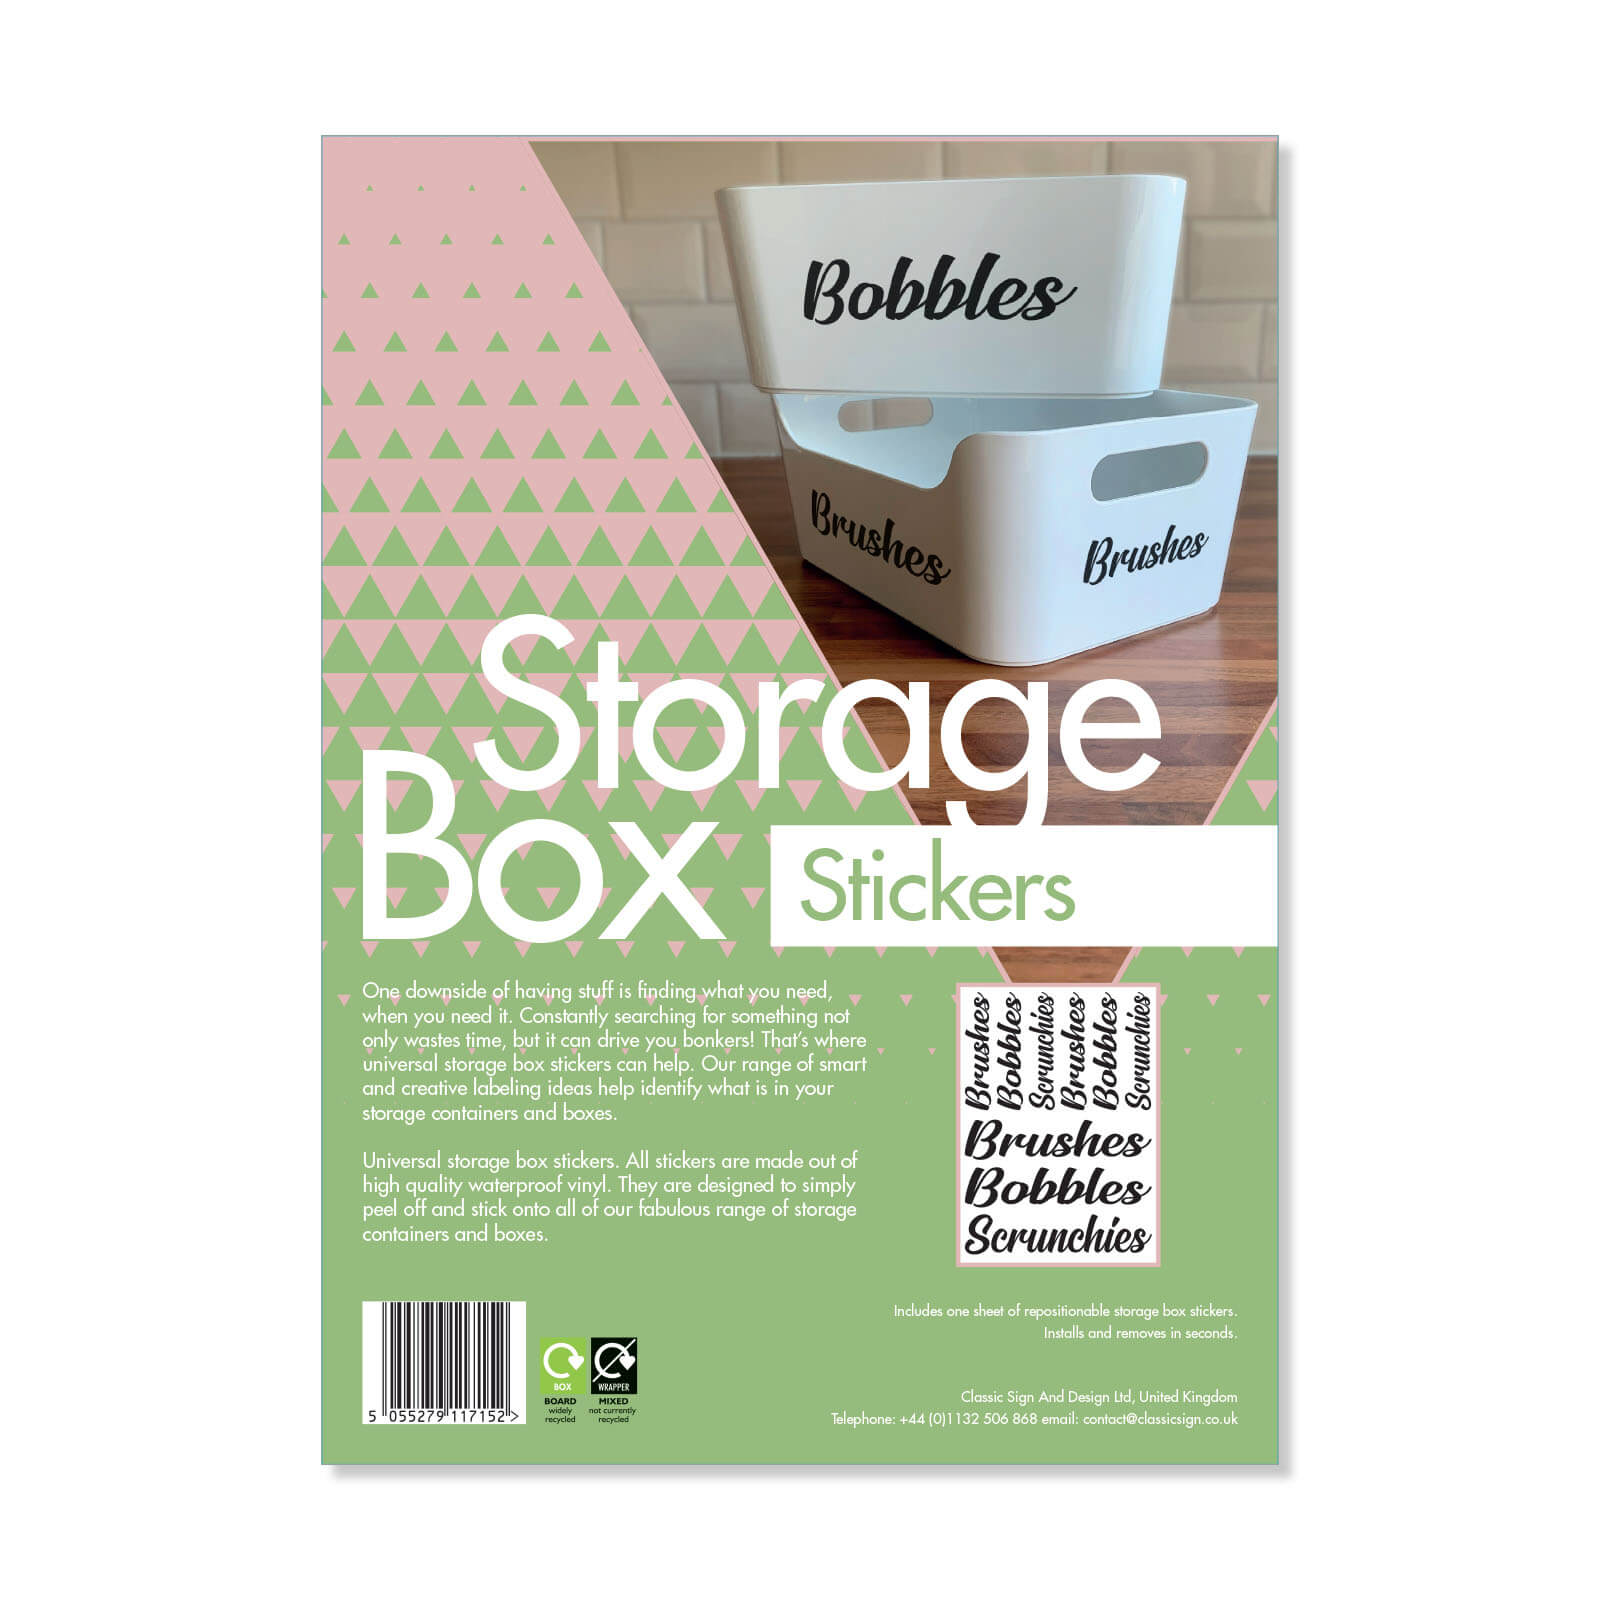 Box Stickers Brushes and Bobbles